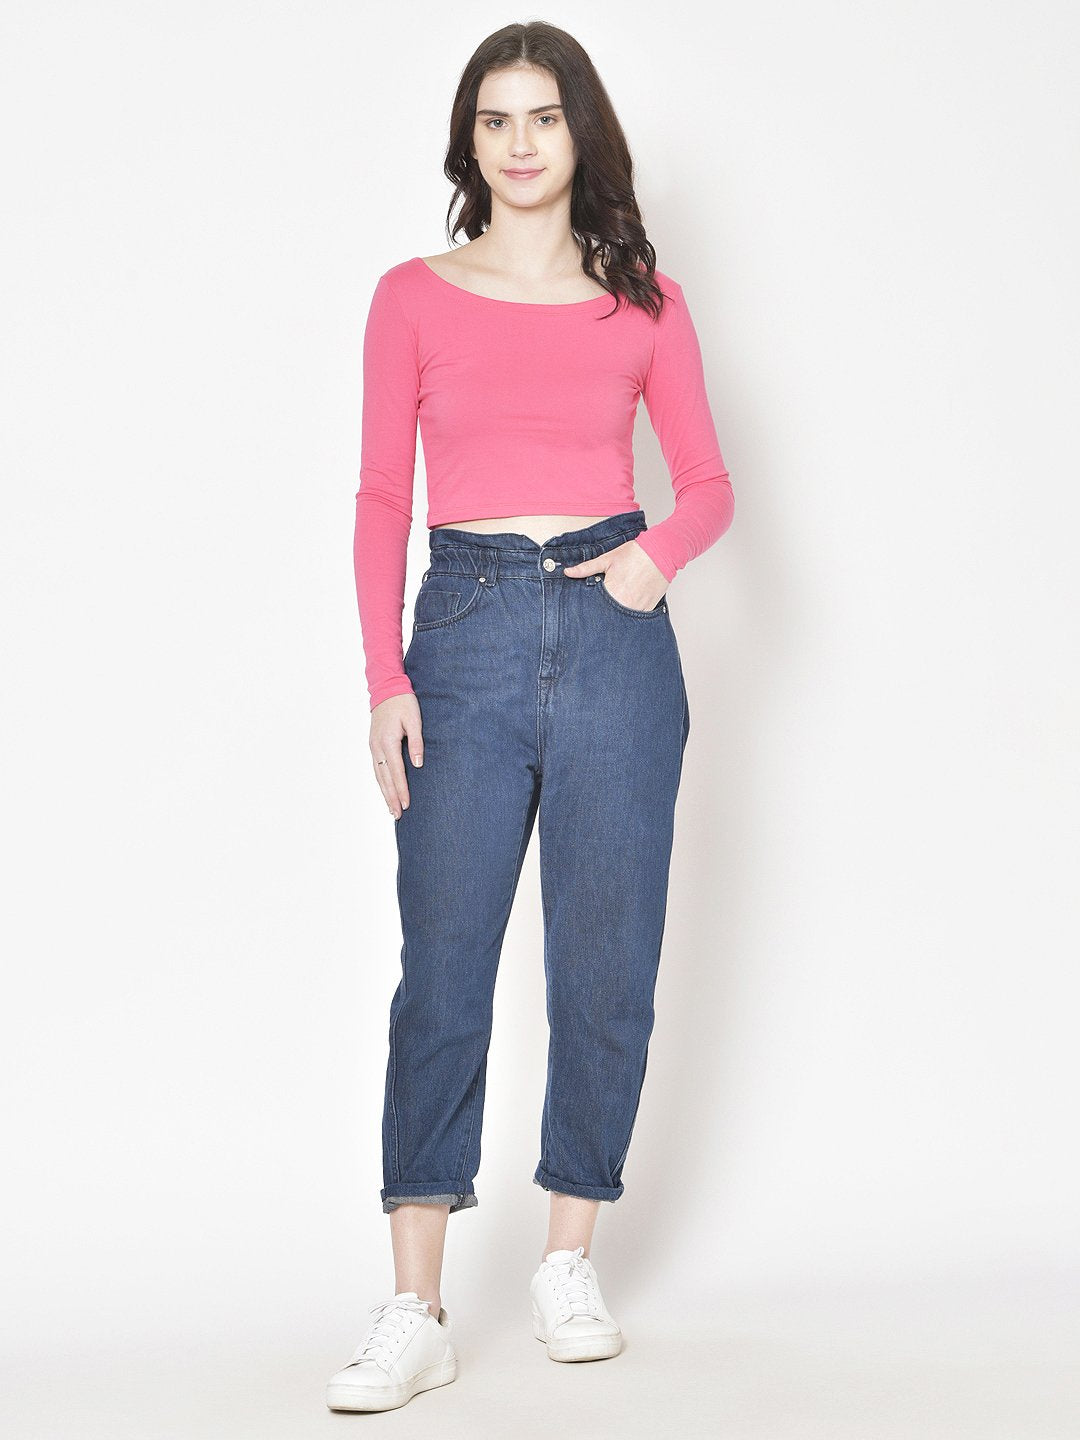 Cation Solid Pink Top